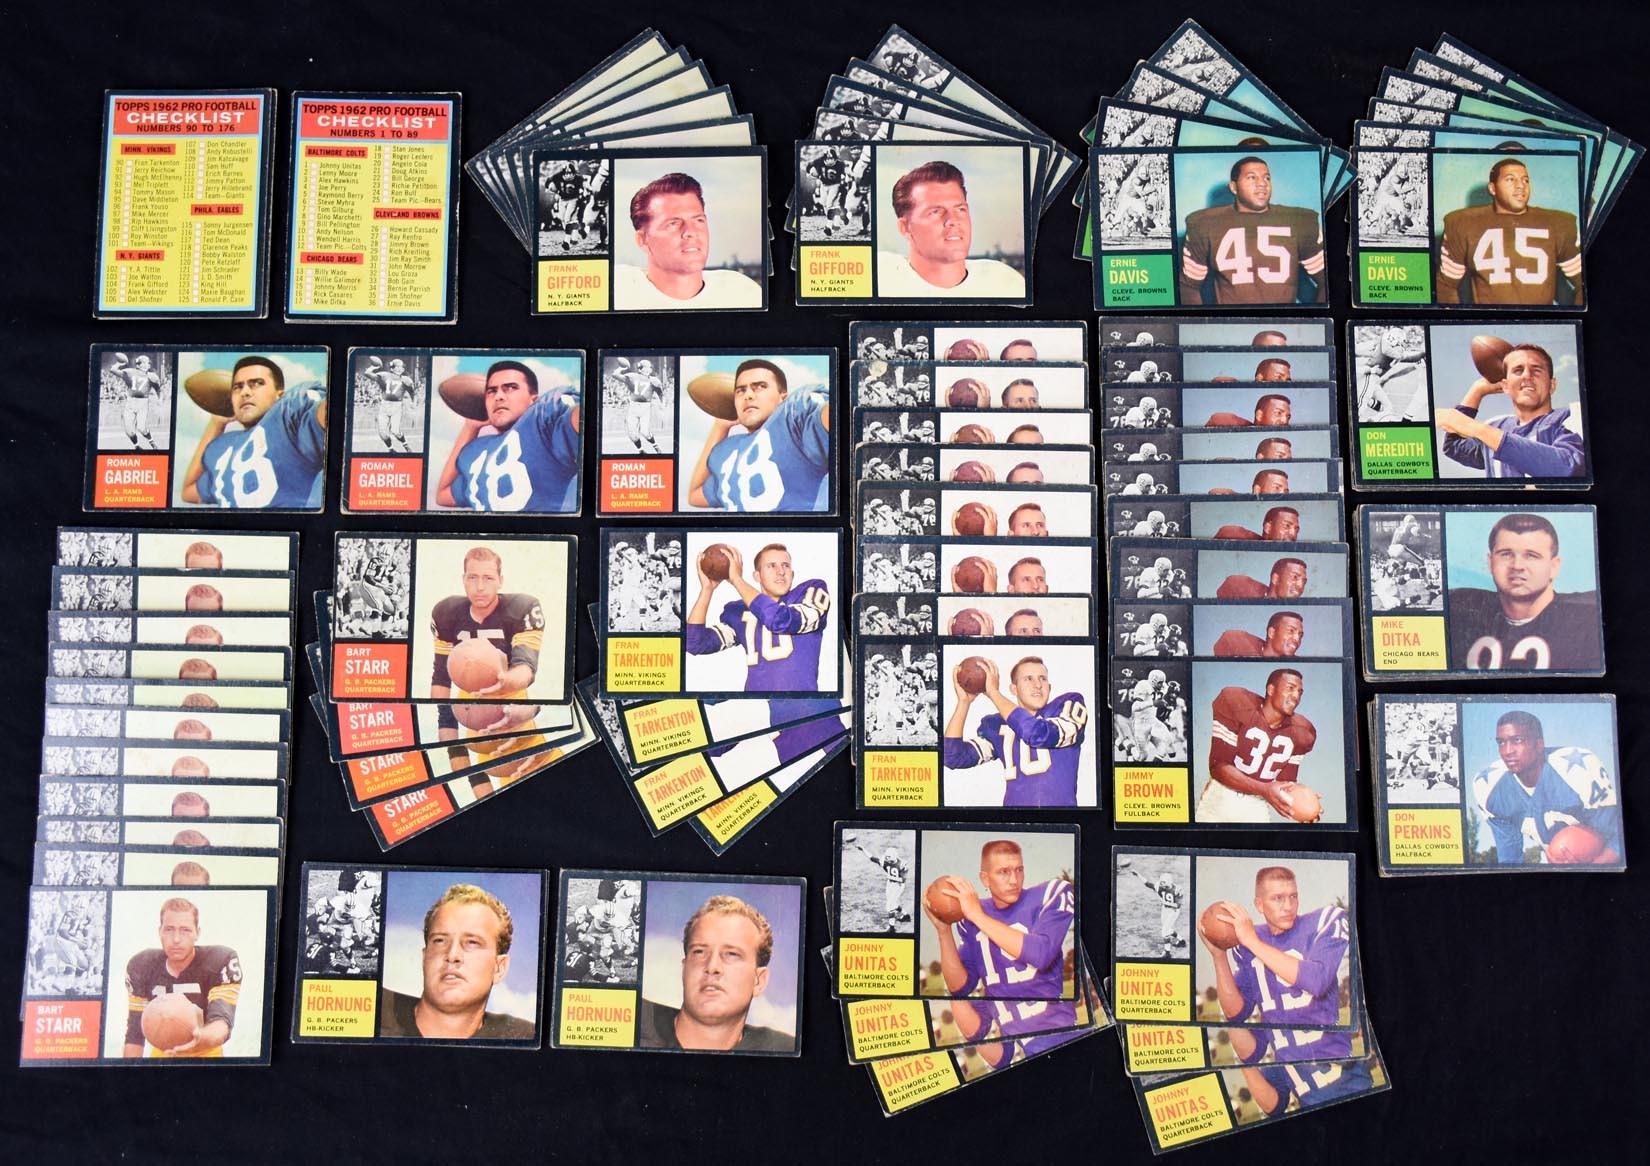 - 1962 Topps Football Card Collection (1,500+)